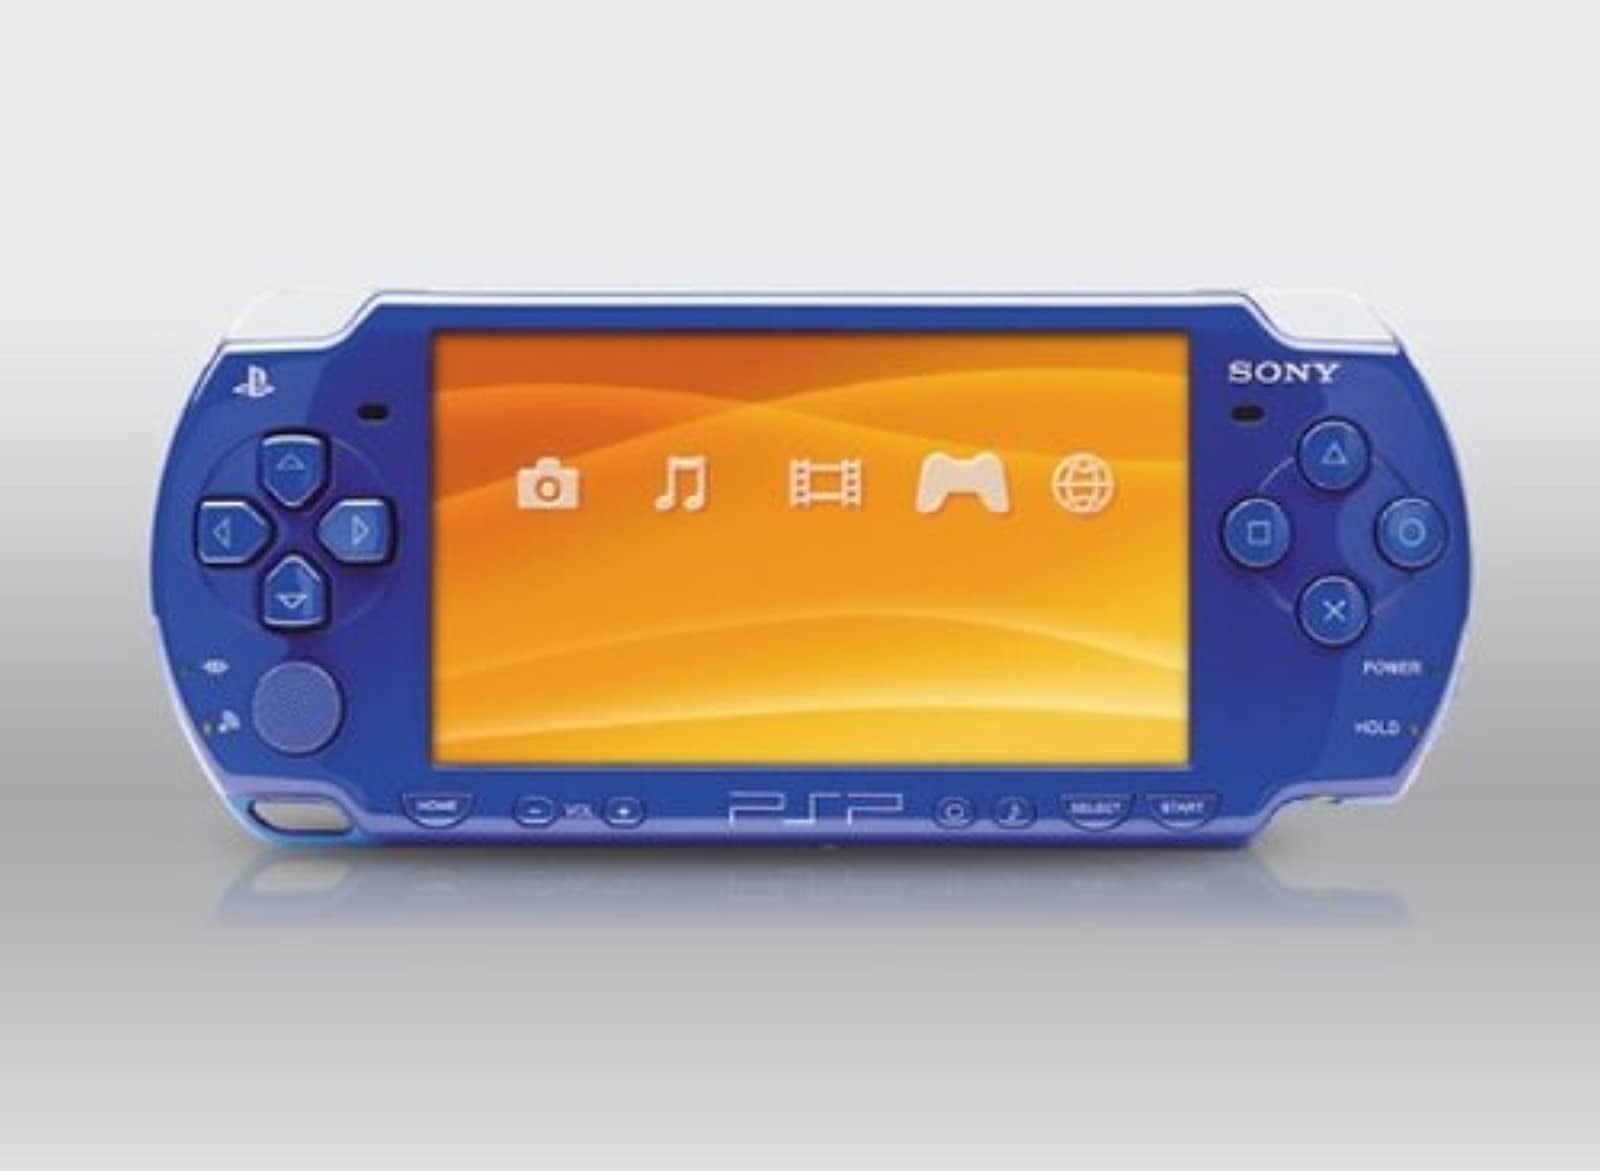 Sony Playstation Portable (PSP) 3000 Series Handheld Gaming Console System  - Orange (Renewed)